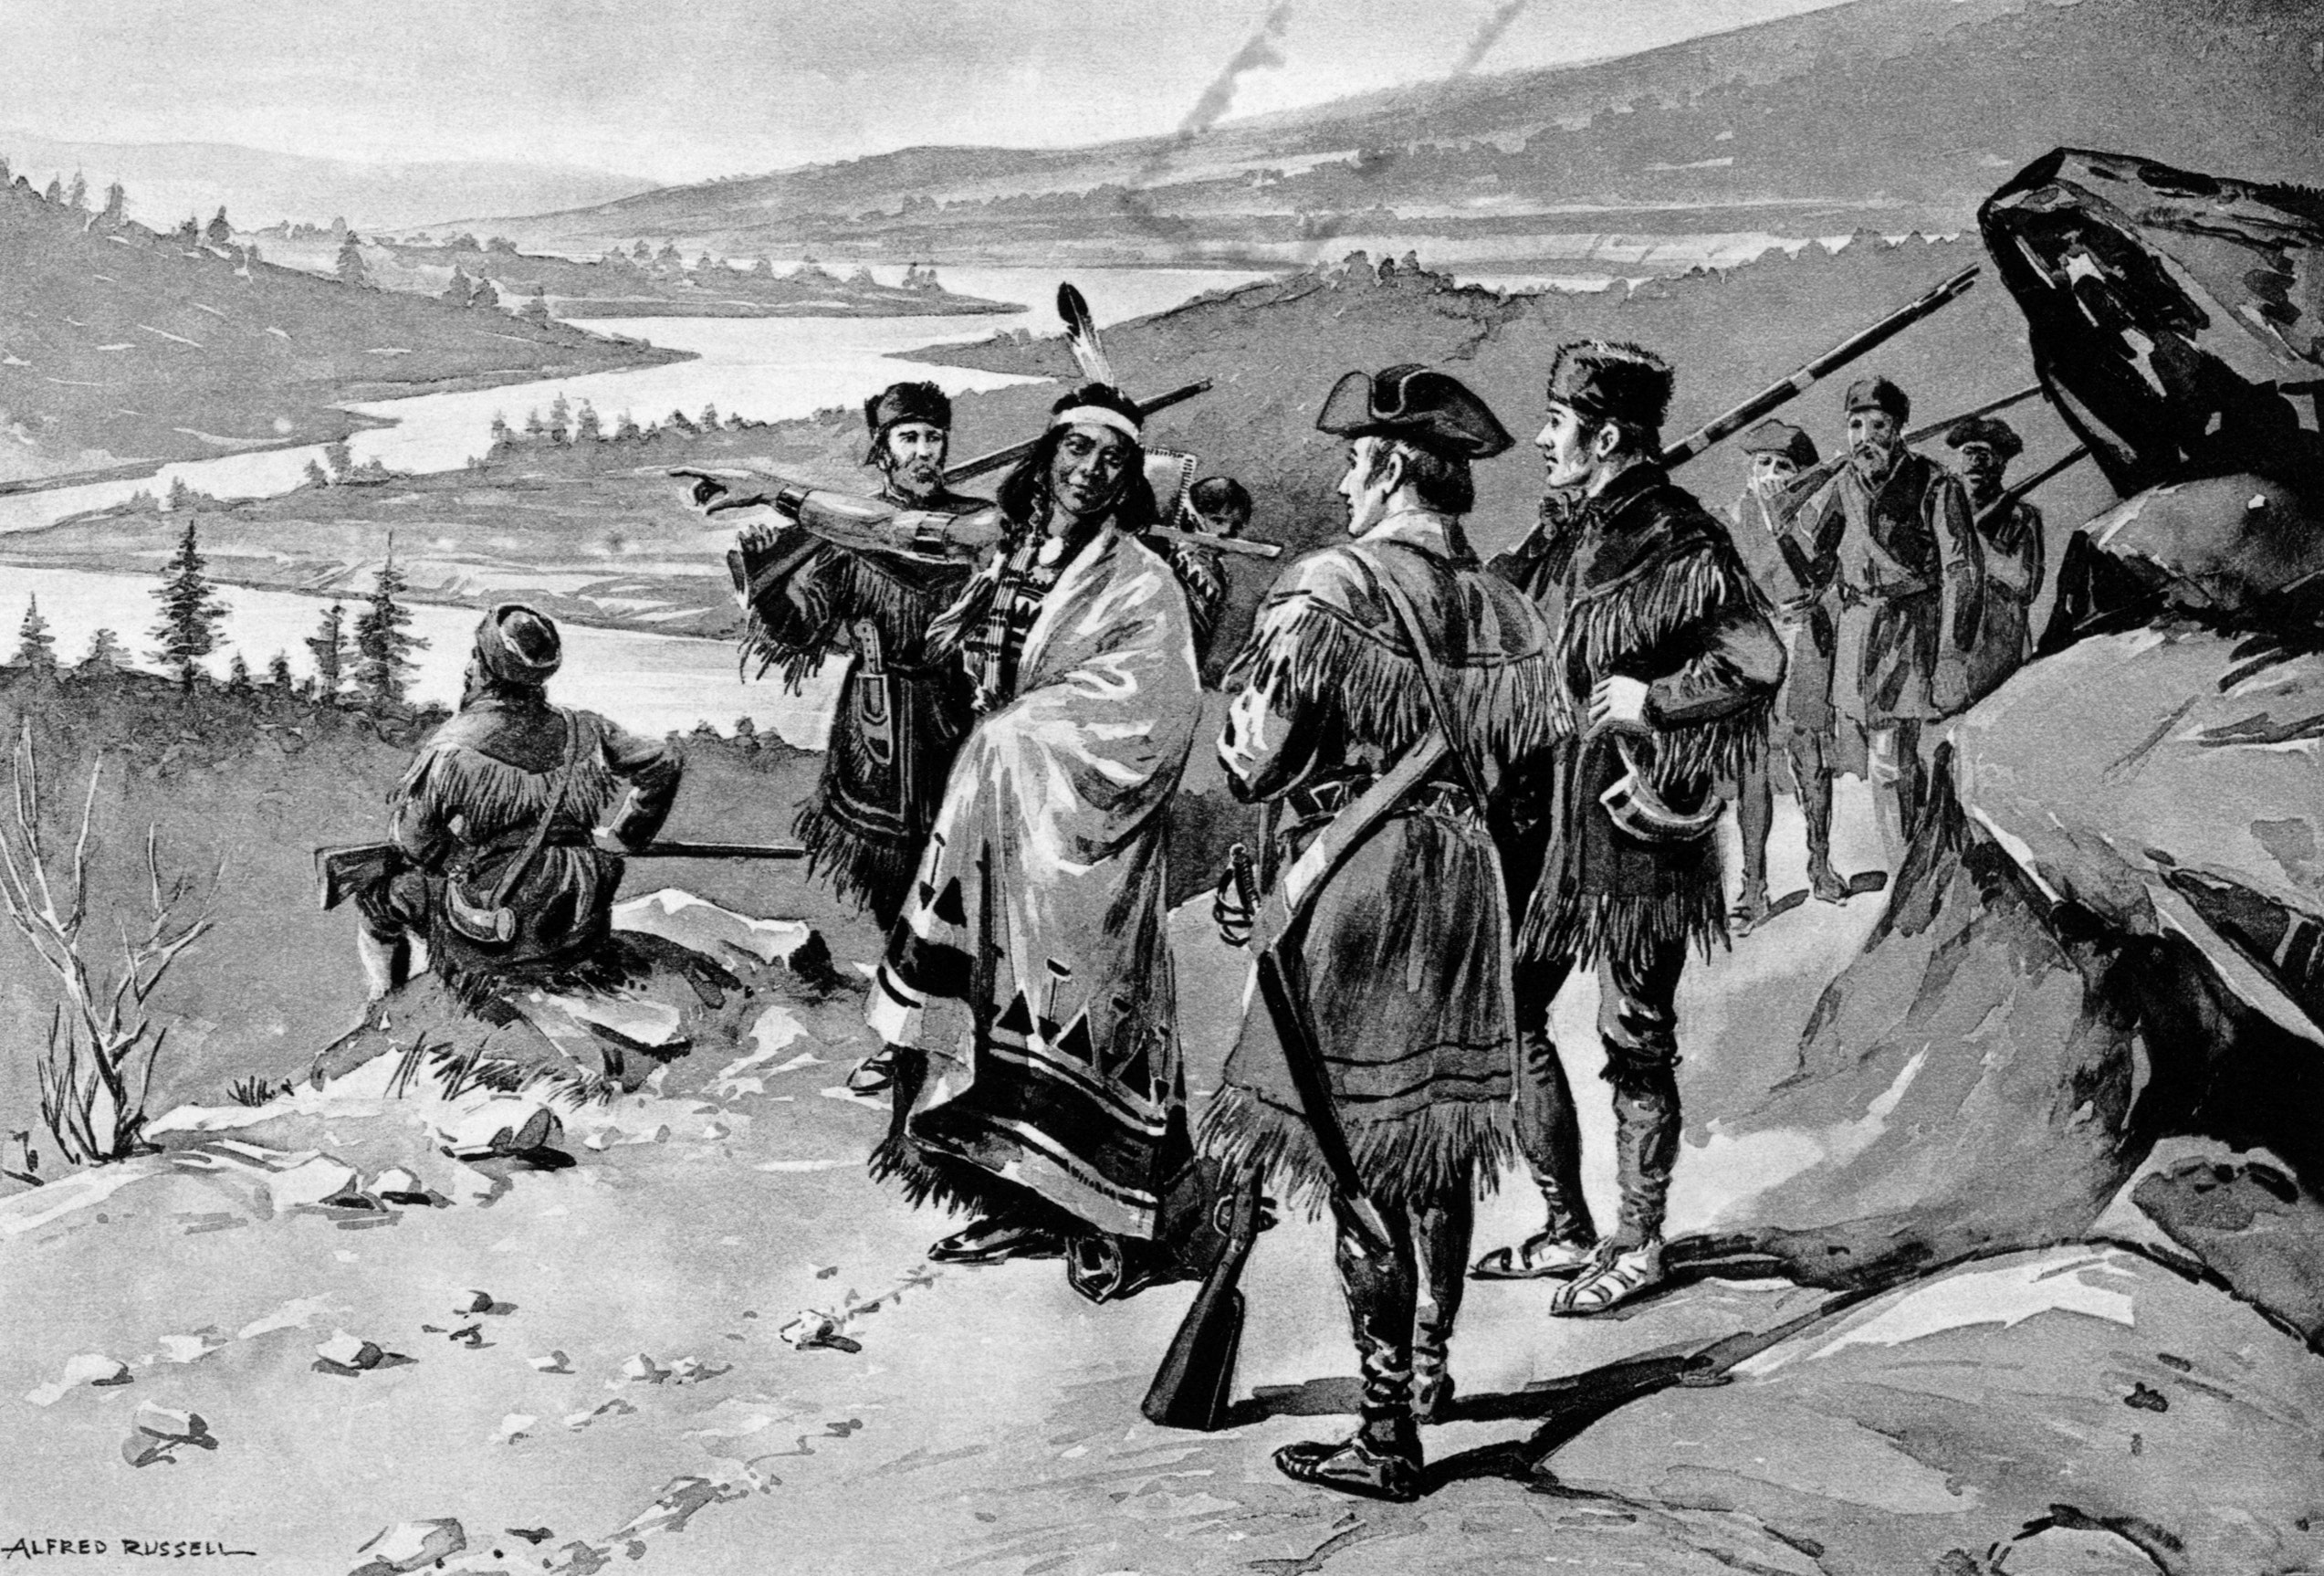 On this day in history, September 23, 1806, Lewis and Clark return to